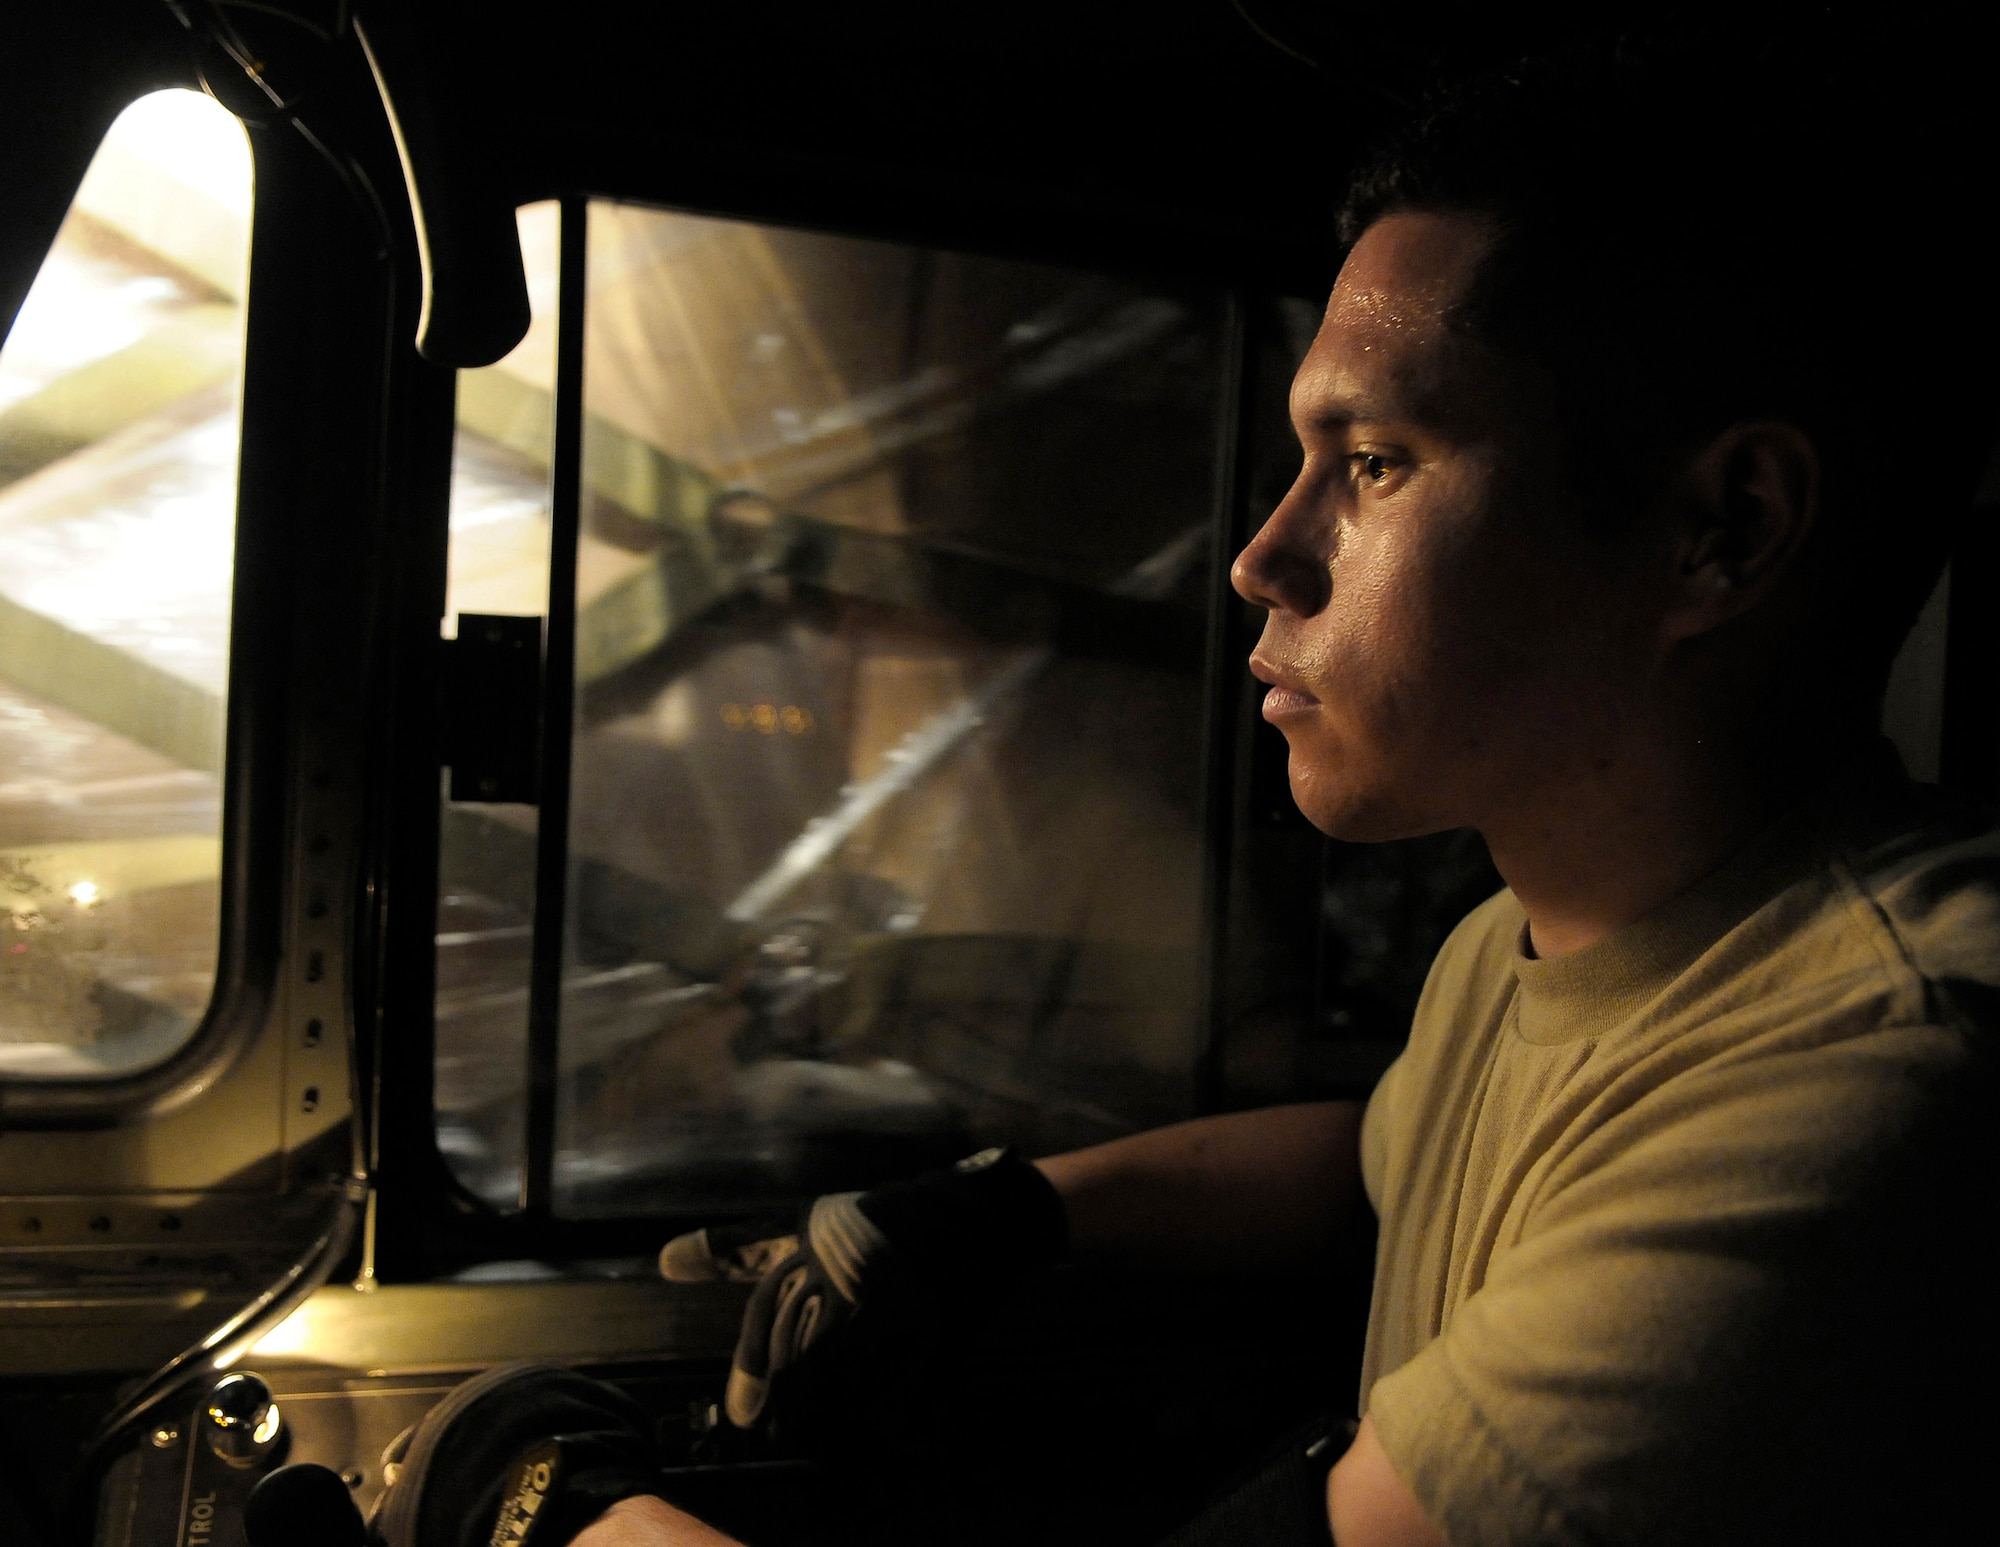 Airman Rodrigo Maranon drives a 60K loader with pallets of personal protection kits at Charleston Air Force Base, S.C., May 8. The personal protection kits were shipped to Haiti, El Salvador, Guatemala, Honduras and Nicaragua. The mission was flown by Airmen from the 437th Airlift Wing at Charleston AFB, with command and control oversight provided by the 618th Tanker Airlift Control Center at Scott AFB, Ill. (U.S. Air Force photo/James M. Bowman)